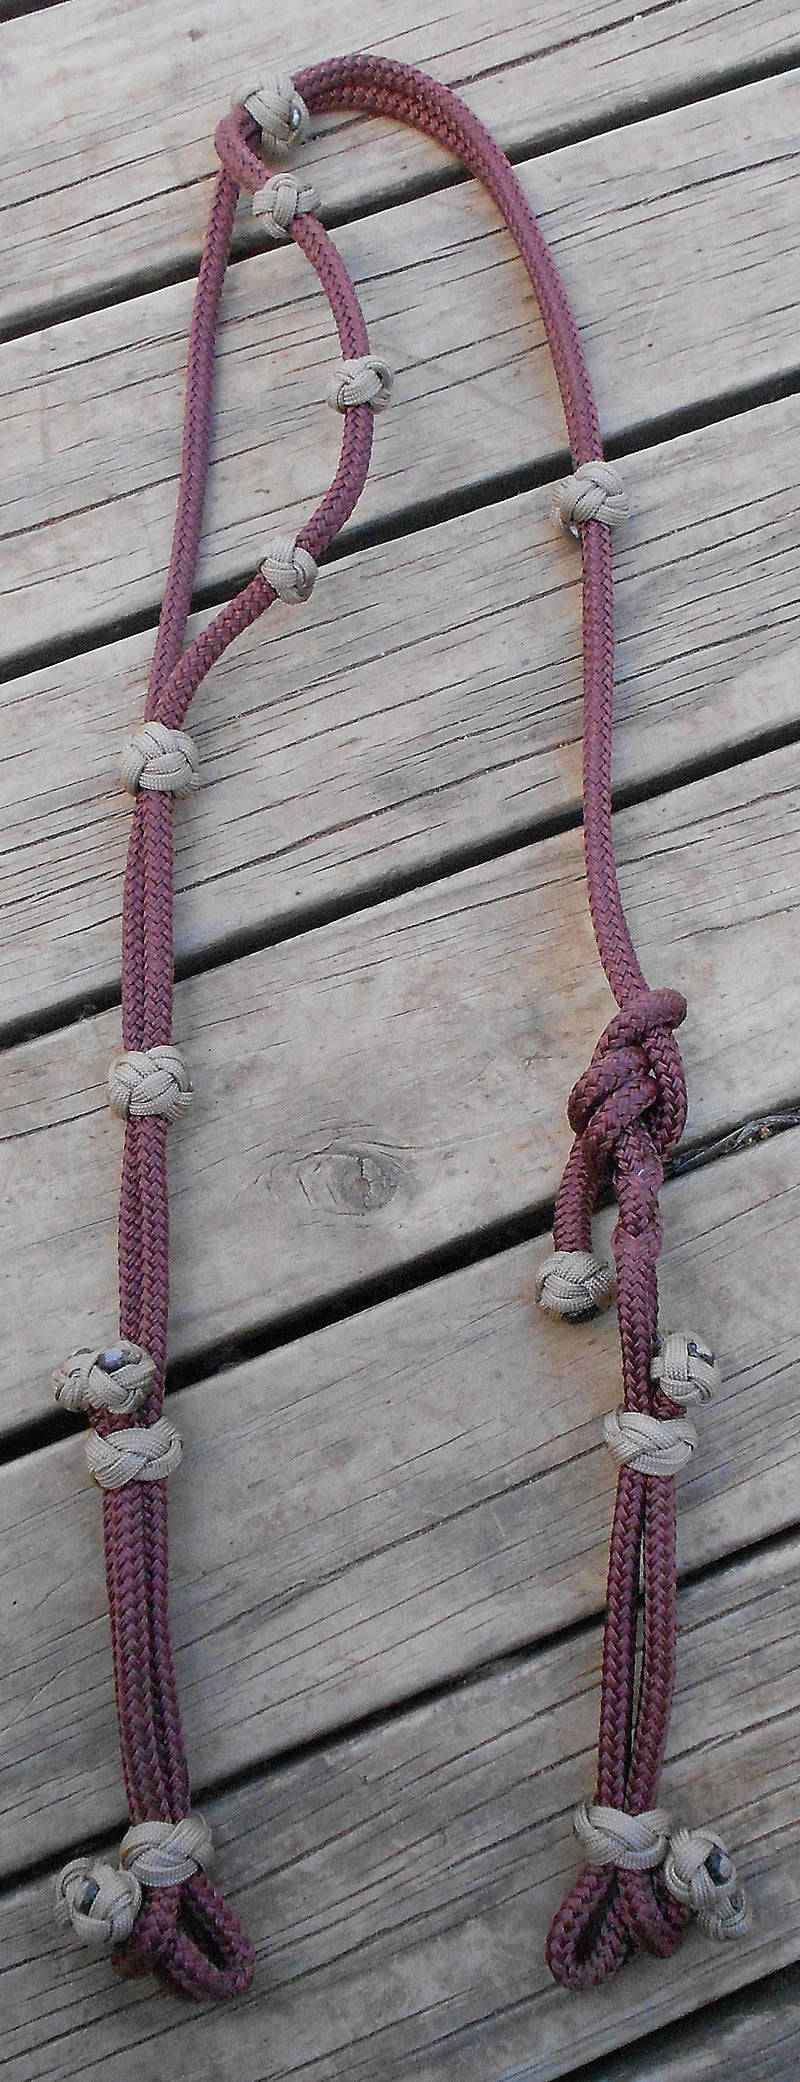 1 or 2 EARRED WESTERN BRIDLE HEAD with BRAIDED KNOTS